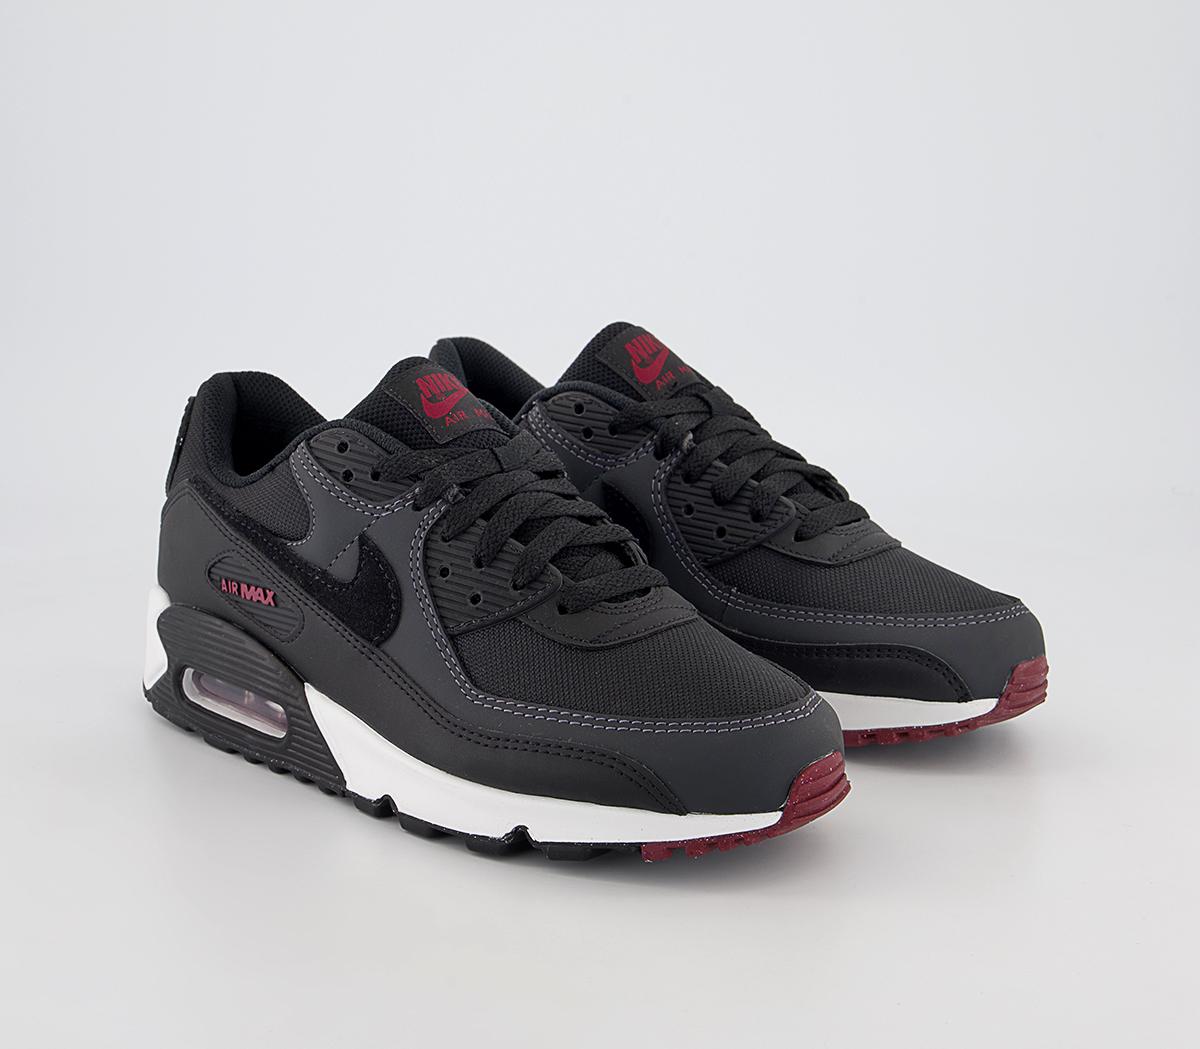 Nike Air Max 90 Trainers Anthracite Black Team Red Summit White - Men's ...